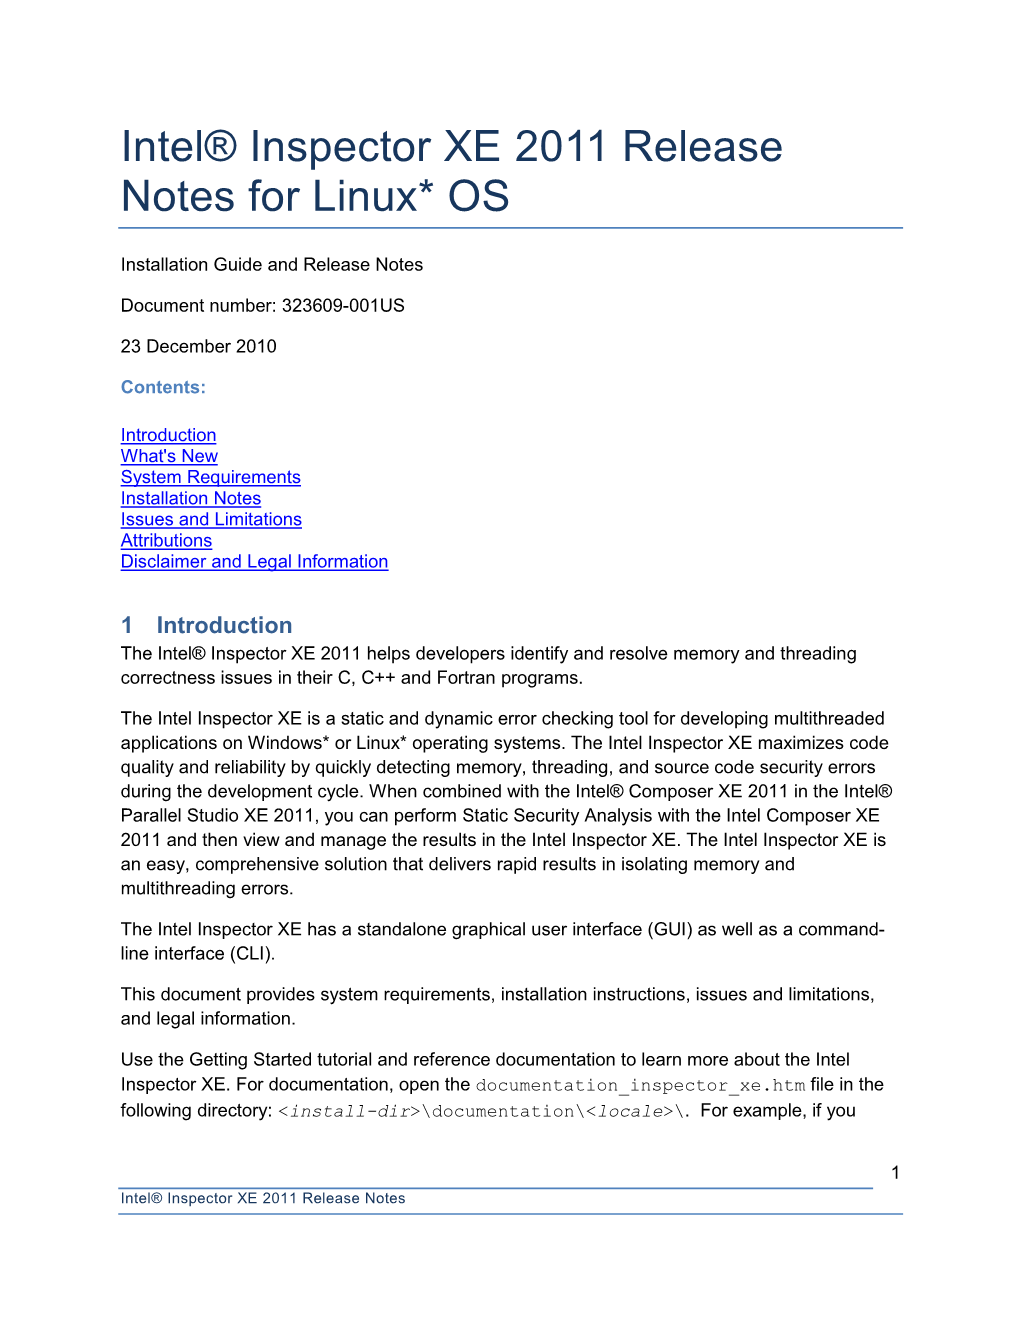 Intel® Inspector XE 2011 Release Notes for Linux* OS